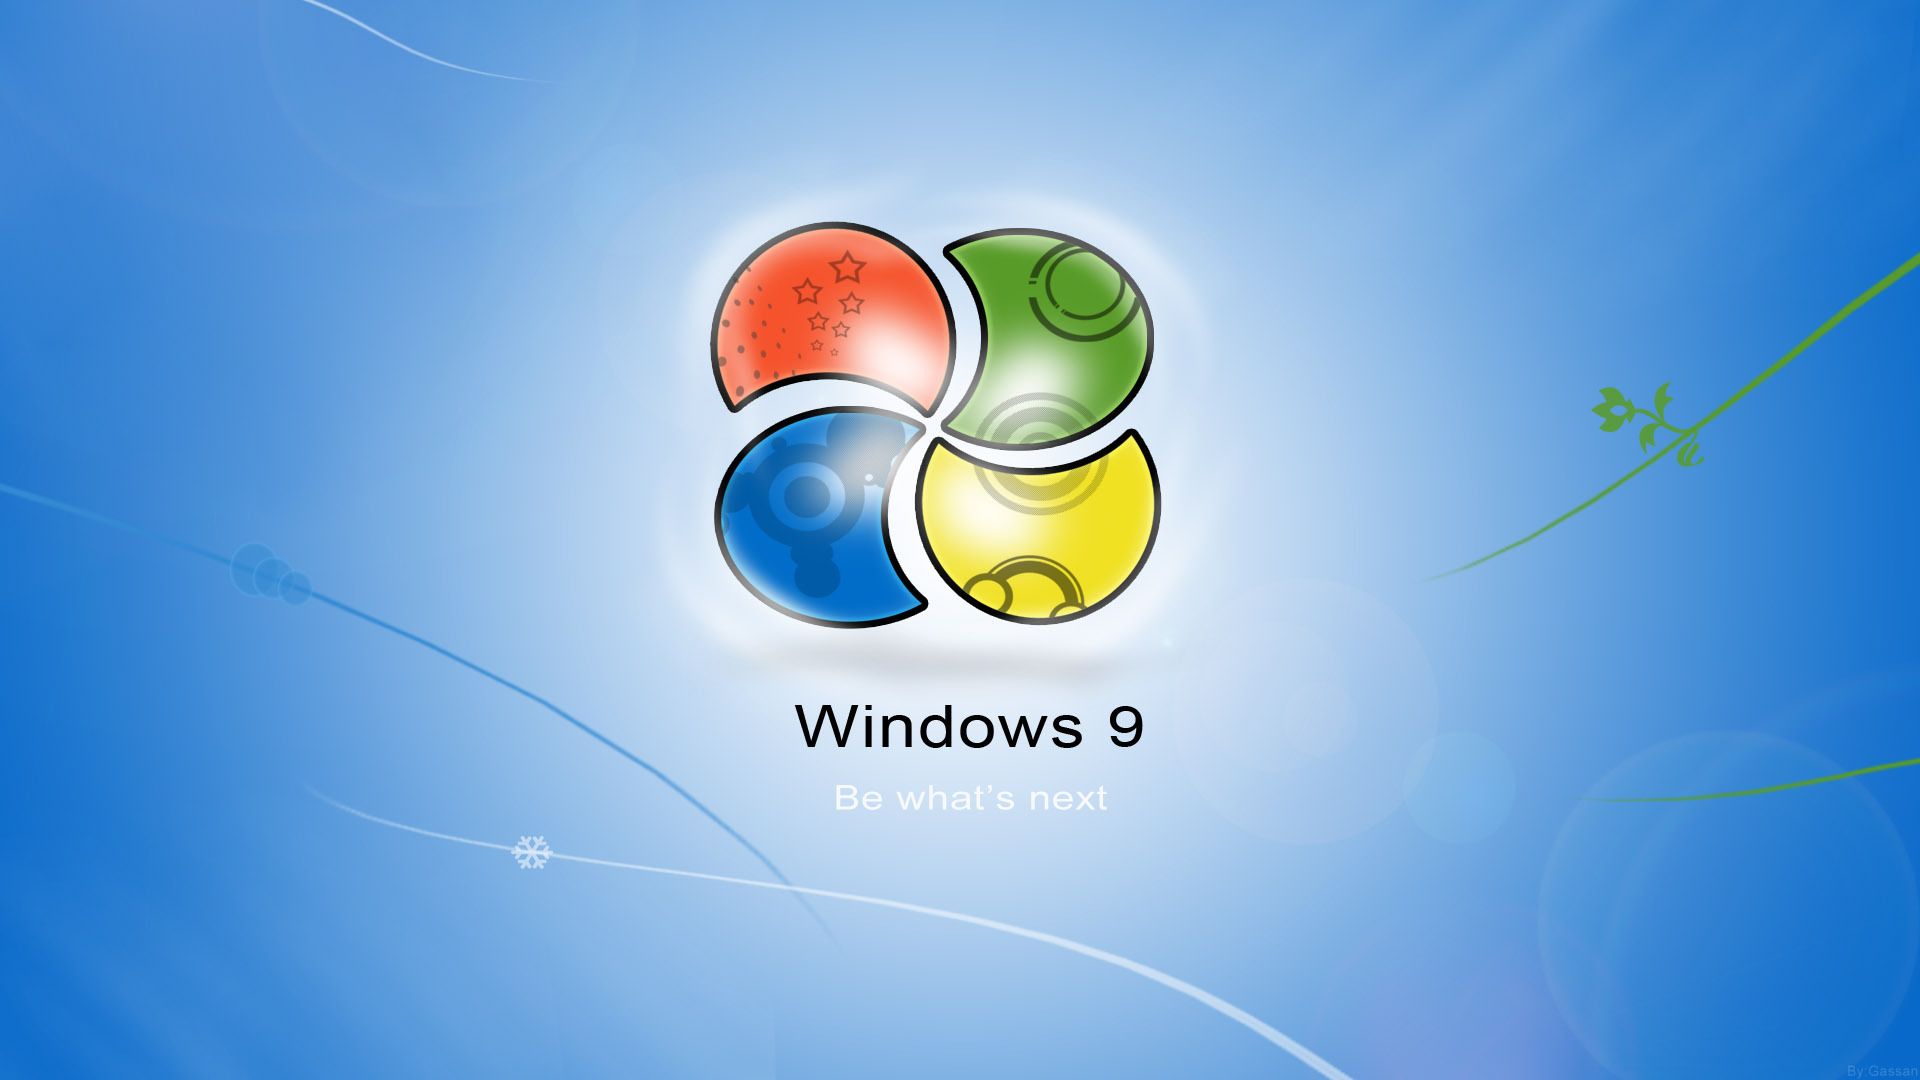 Home windows 9 HD Wallpapers - HD Images New